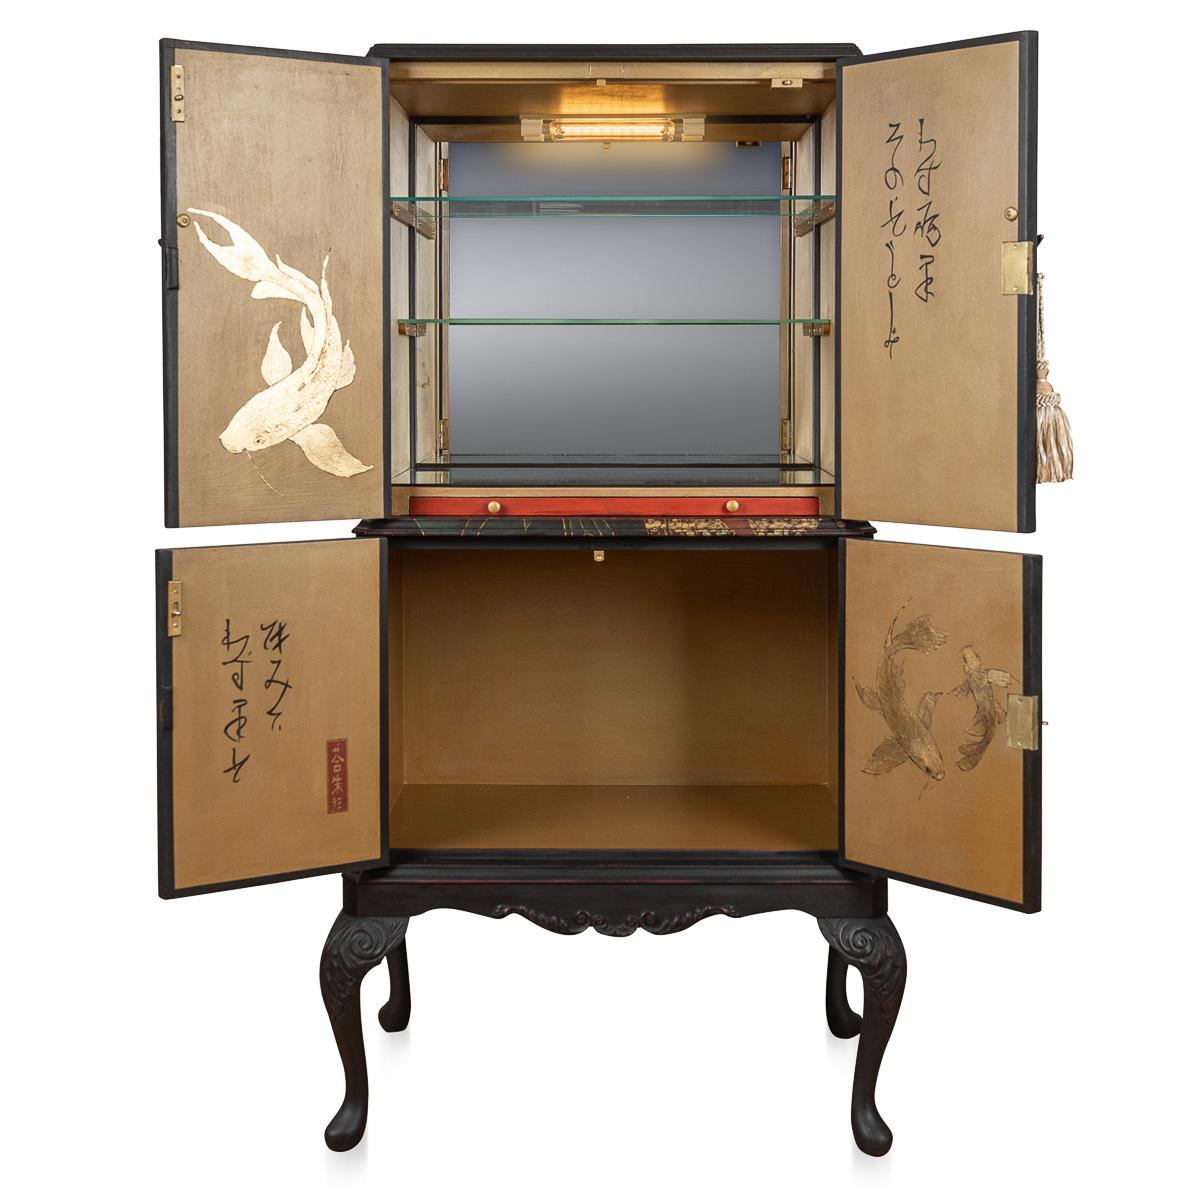 20th Century Japanesque Style Cocktail Cabinet Handpainted Depicting A 'Geisha' For Sale